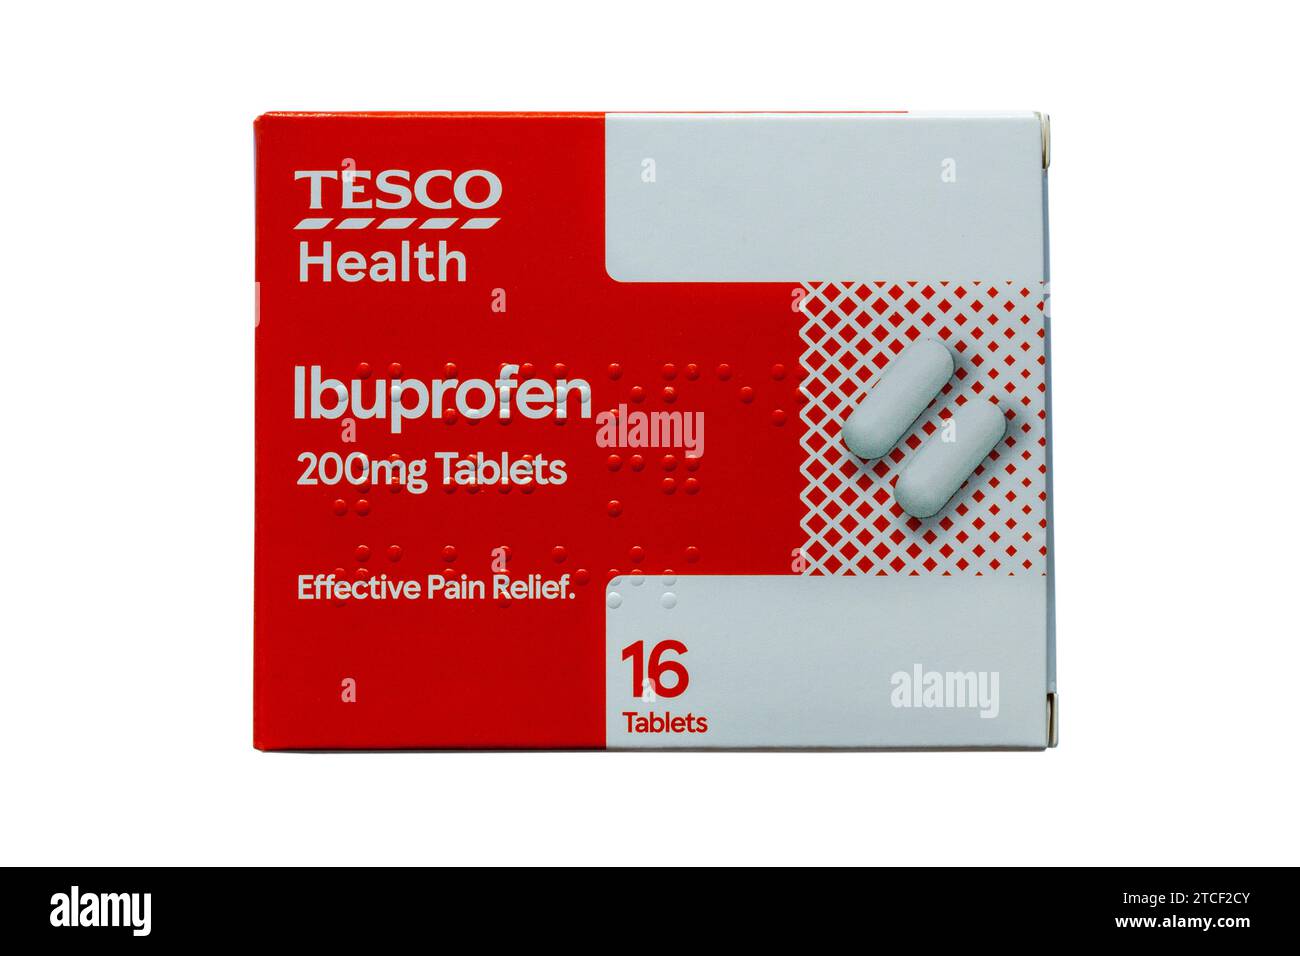 Tesco Health ibuprofen 200mg tablets effective pain relief tablets medication isolated on white background Stock Photo